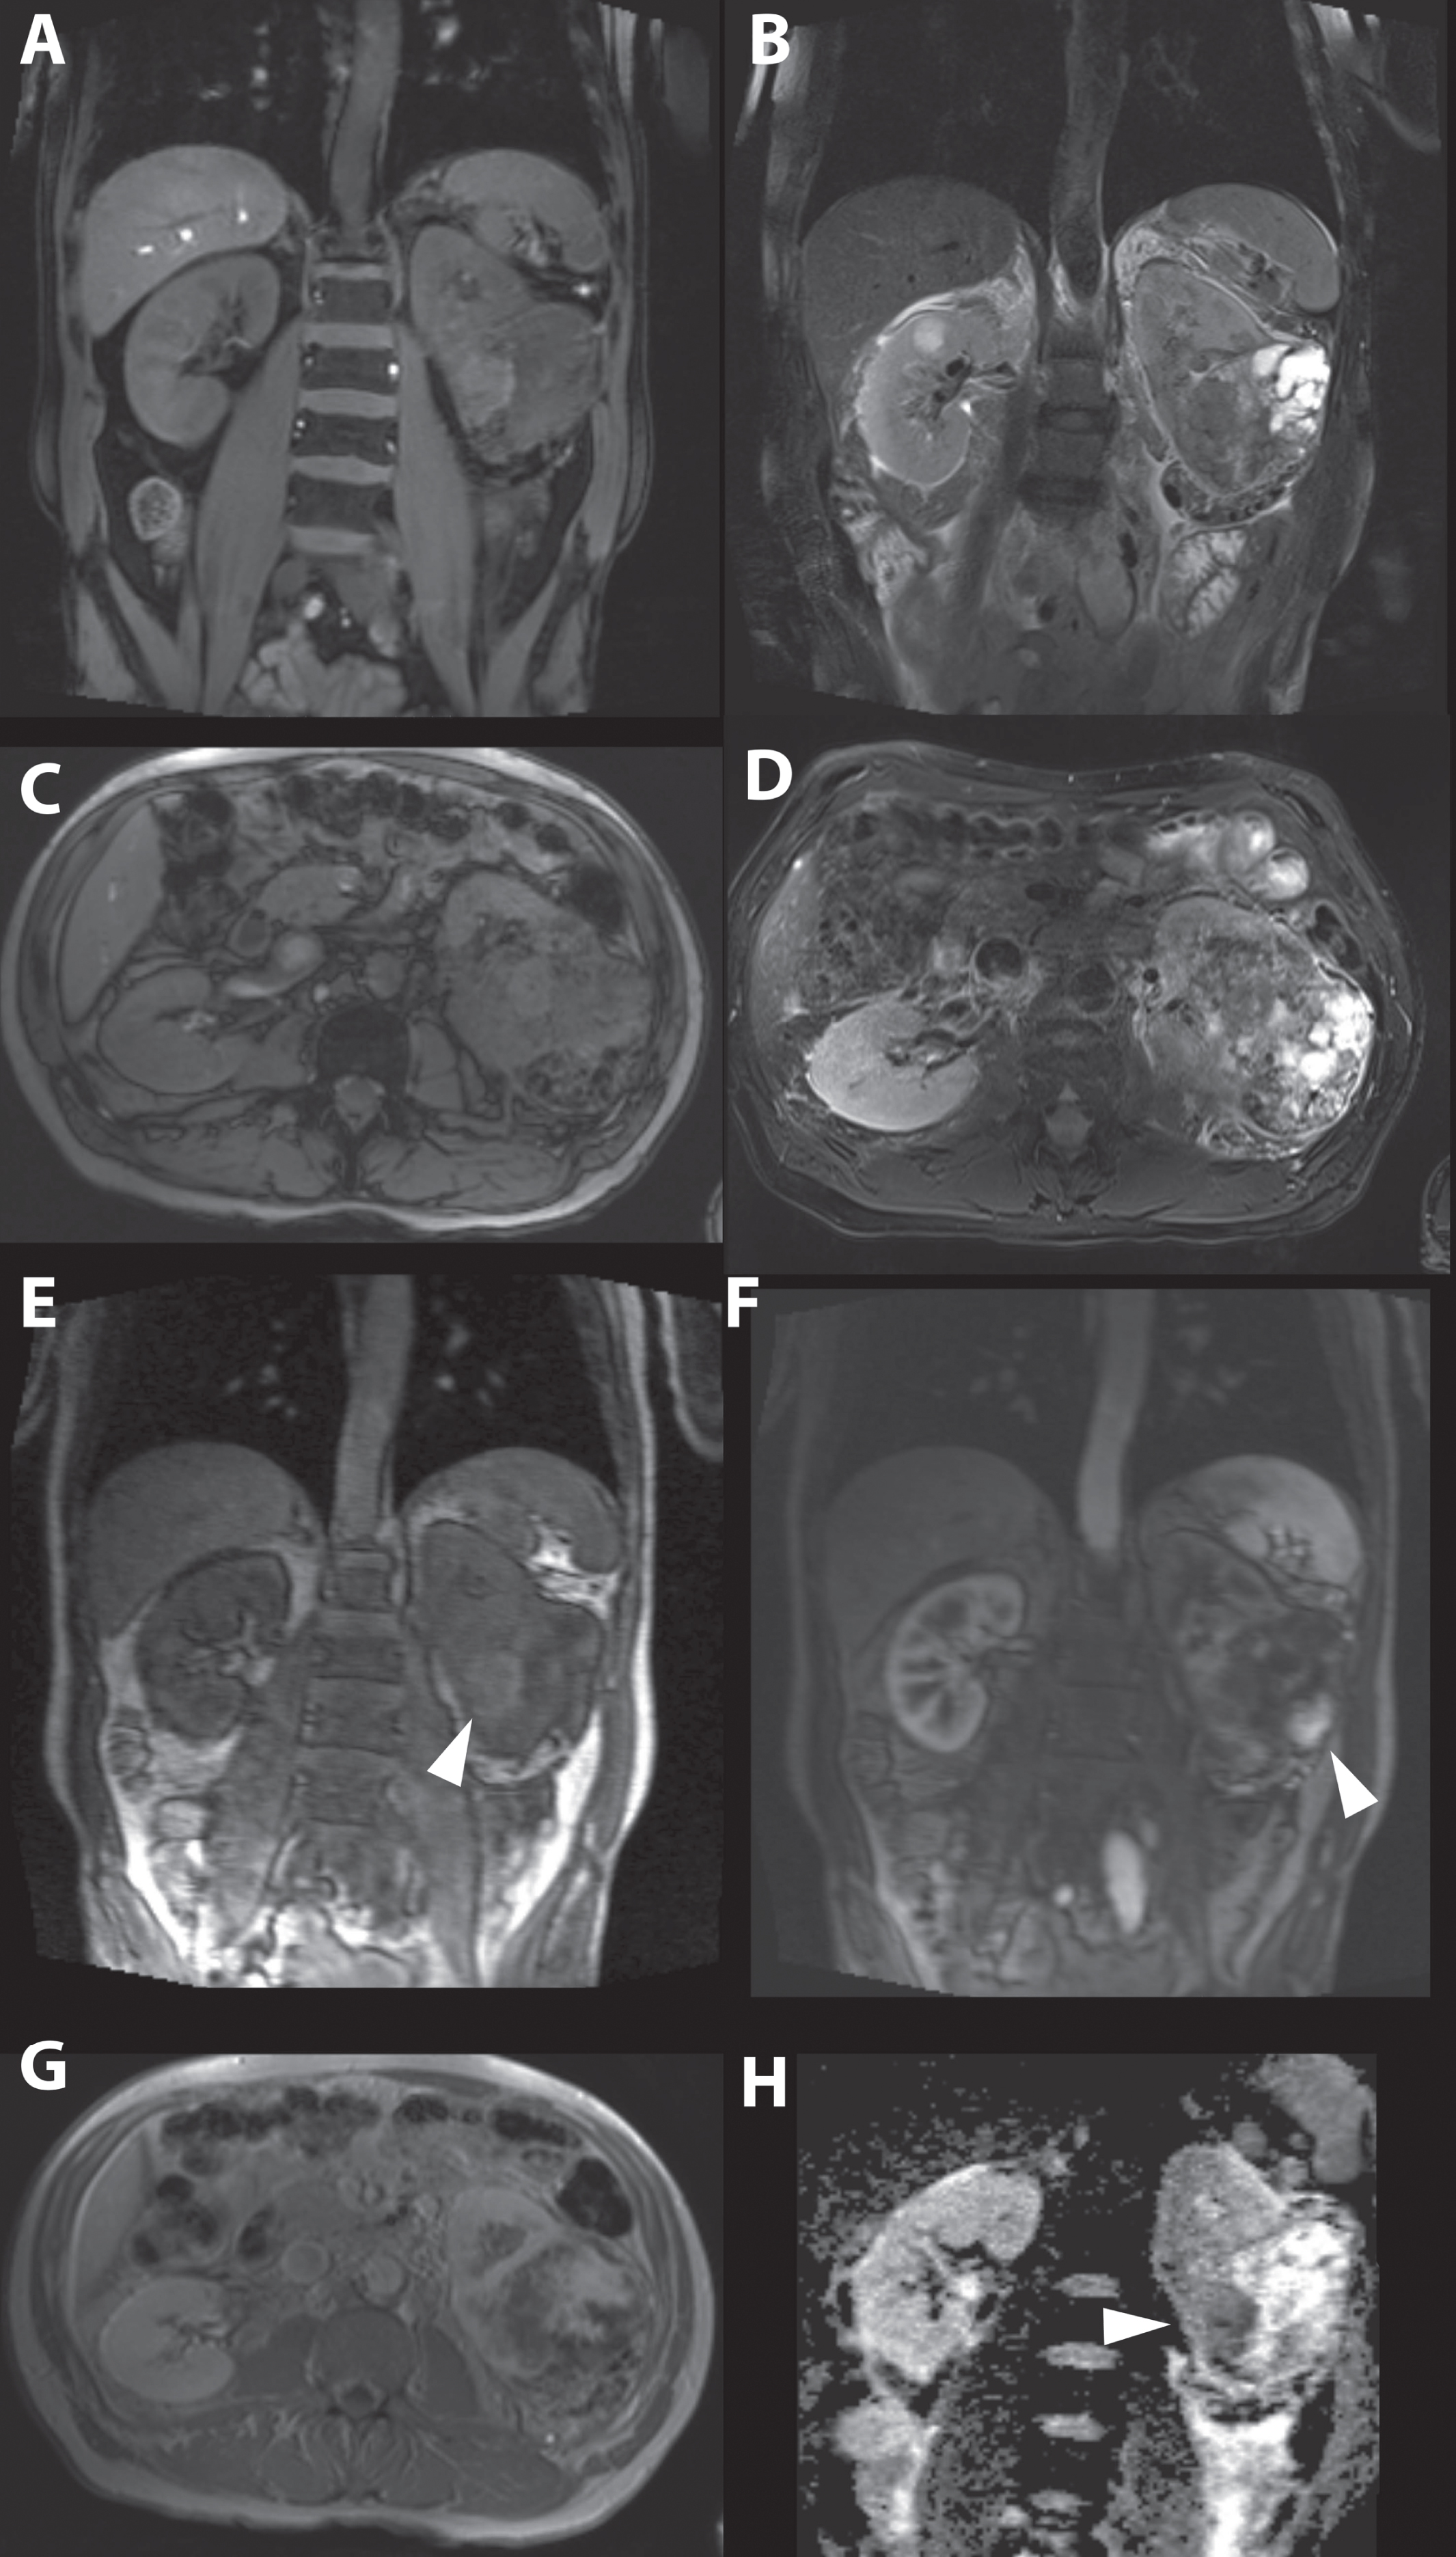 A 63-year-old women was referred for a renal mass detected during analysis of hematuria. Magnetic resonance imaging showed a generally isointense tumor on T1-weighted imaging (A and C), and heterogeneous mainly hypertintense signal intensity on T2-weighted imaging (B and D) consisting of a mixture of tumor and cystic areas and areas with necrosis. Early enhancement is seen in solid parts of the tumor more centrally located. (E) In a later phase the solid parts in the peripheral tumor also enhanced strongly. (F and G). The apparent diffusion coefficient (ADC) map showed diffusion restriction mainly in the more central and solid part of the tumor (H). Consistent with the highly suggestive findings of the MRI, pathology report after open radical nephrectomy showed a 90 mm large Furhman grade III, clear cell renal cell carcinoma.